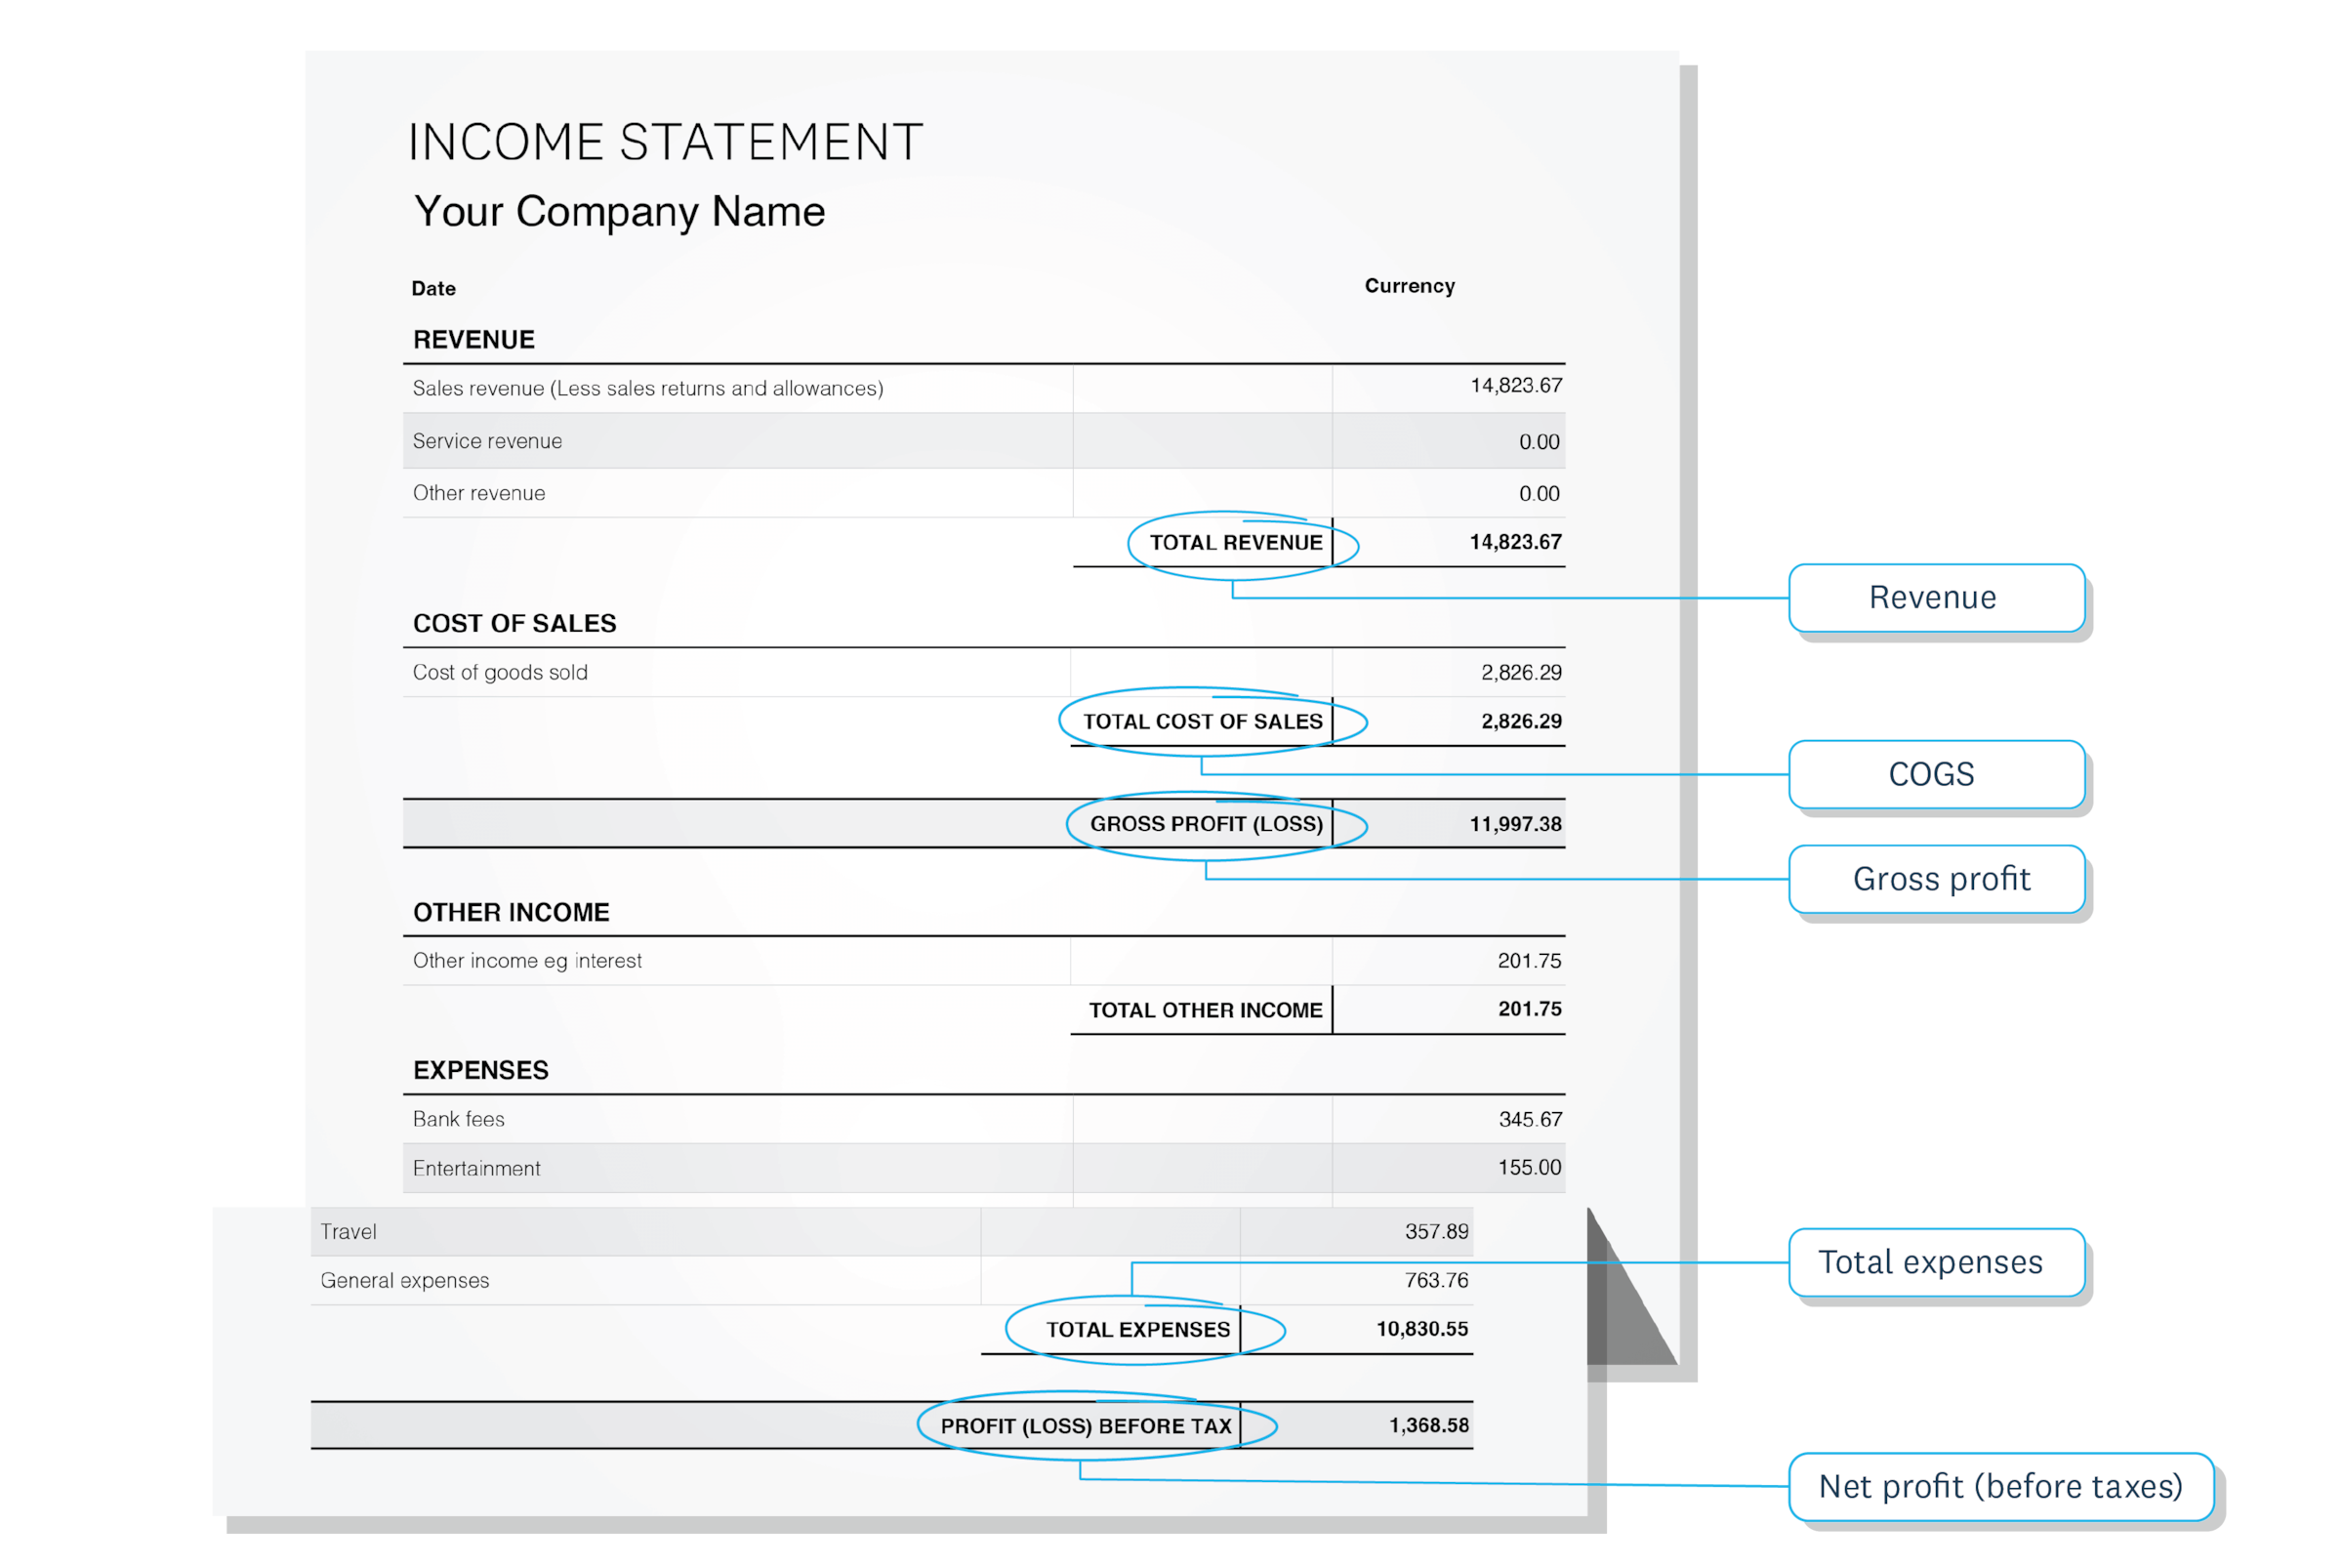 Sample income statement with sections for revenue, COGS, gross profit, general expenses and net profit.